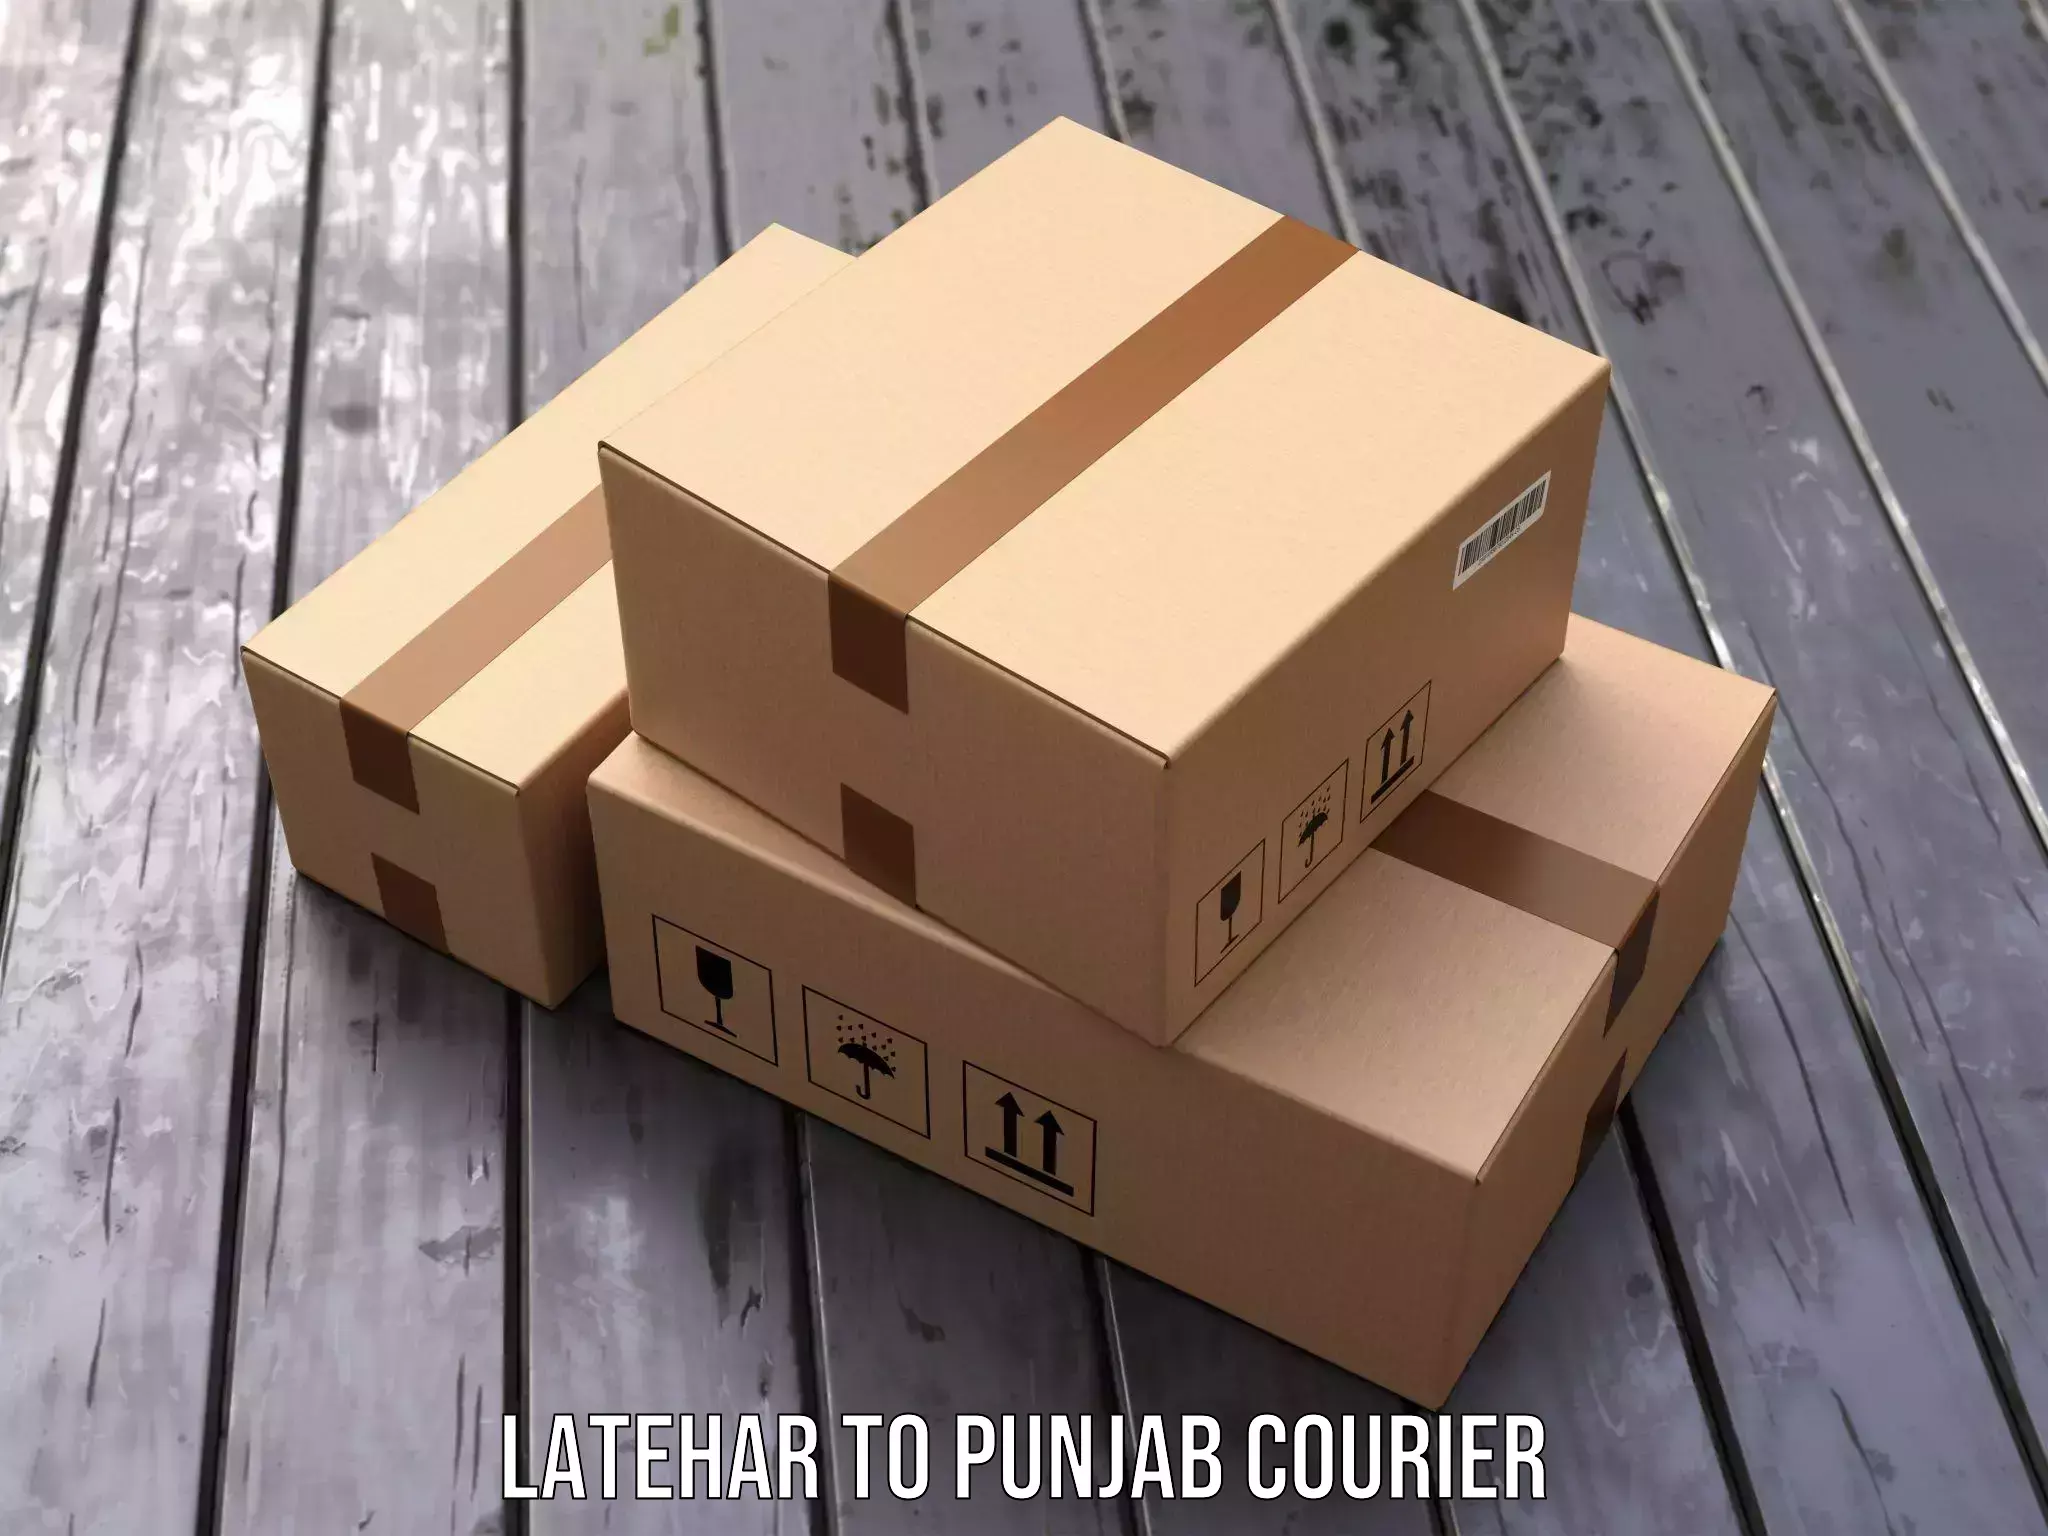 Cargo delivery service Latehar to Punjab